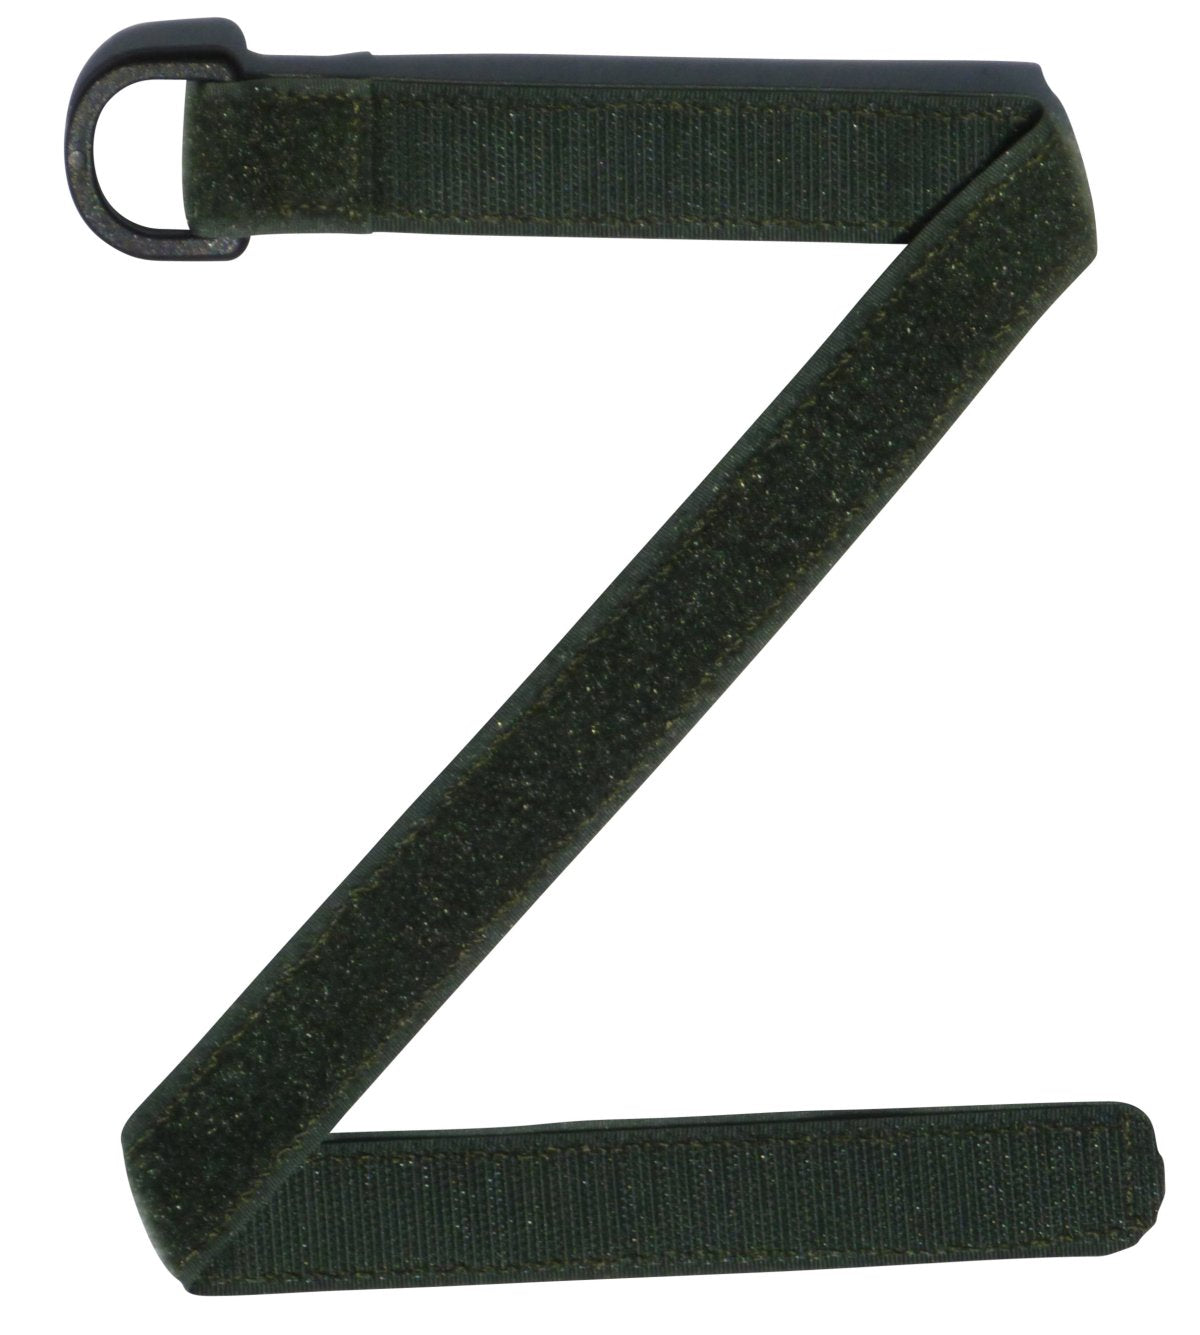 Benristraps 25mm Hook and Loop Strap with D Ring (Pair) in green